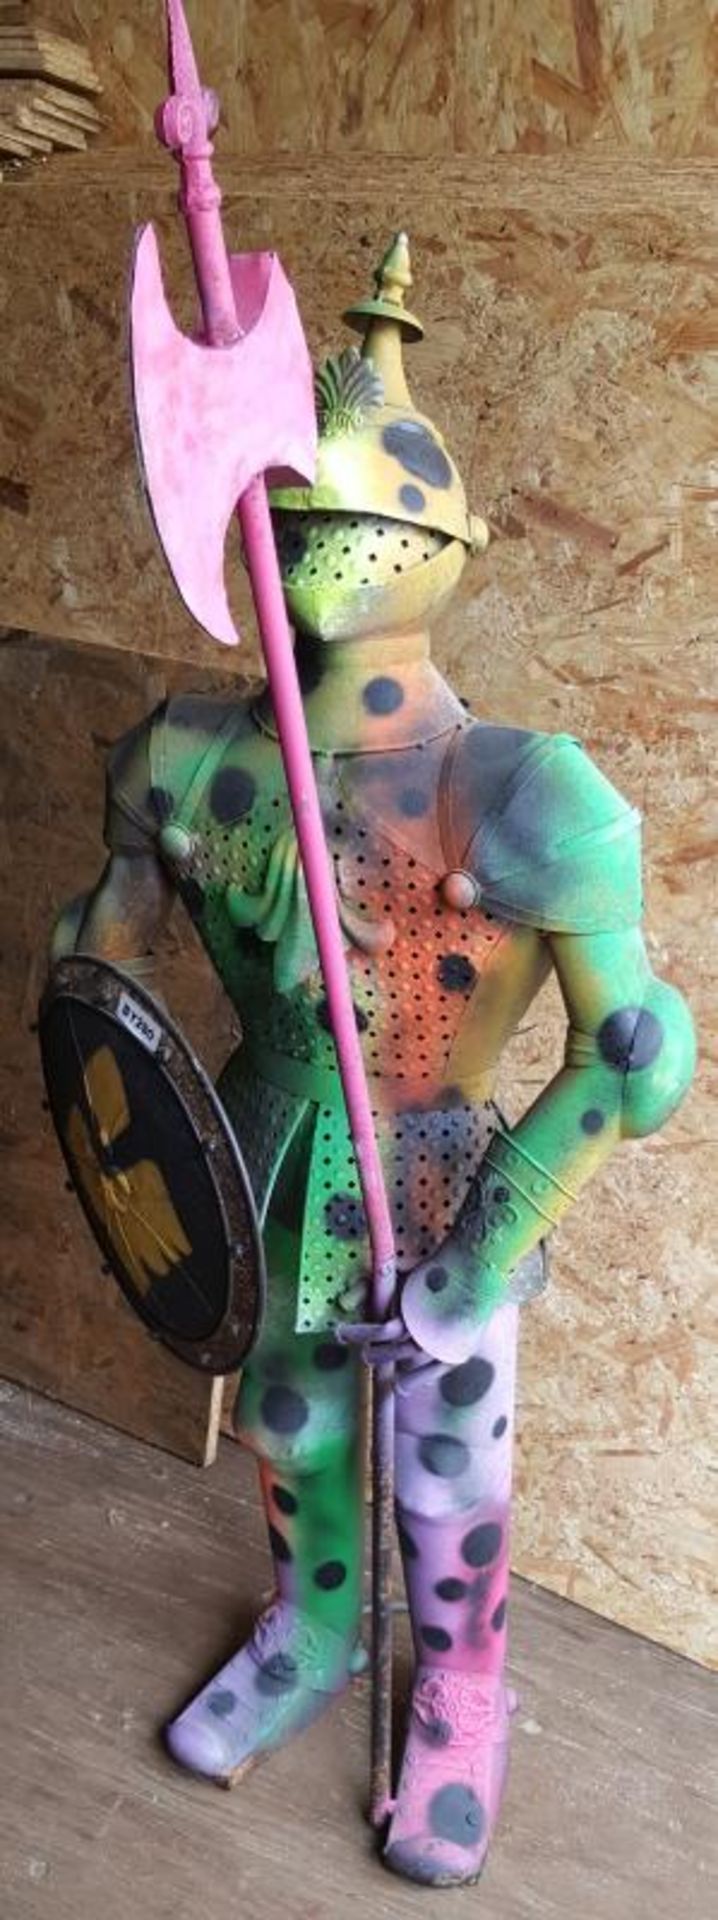 1 x 1 x 4'4" Bespoke Multi Coloured Armored Knight Figure With Specially Commissioned Paintwork - Image 3 of 4